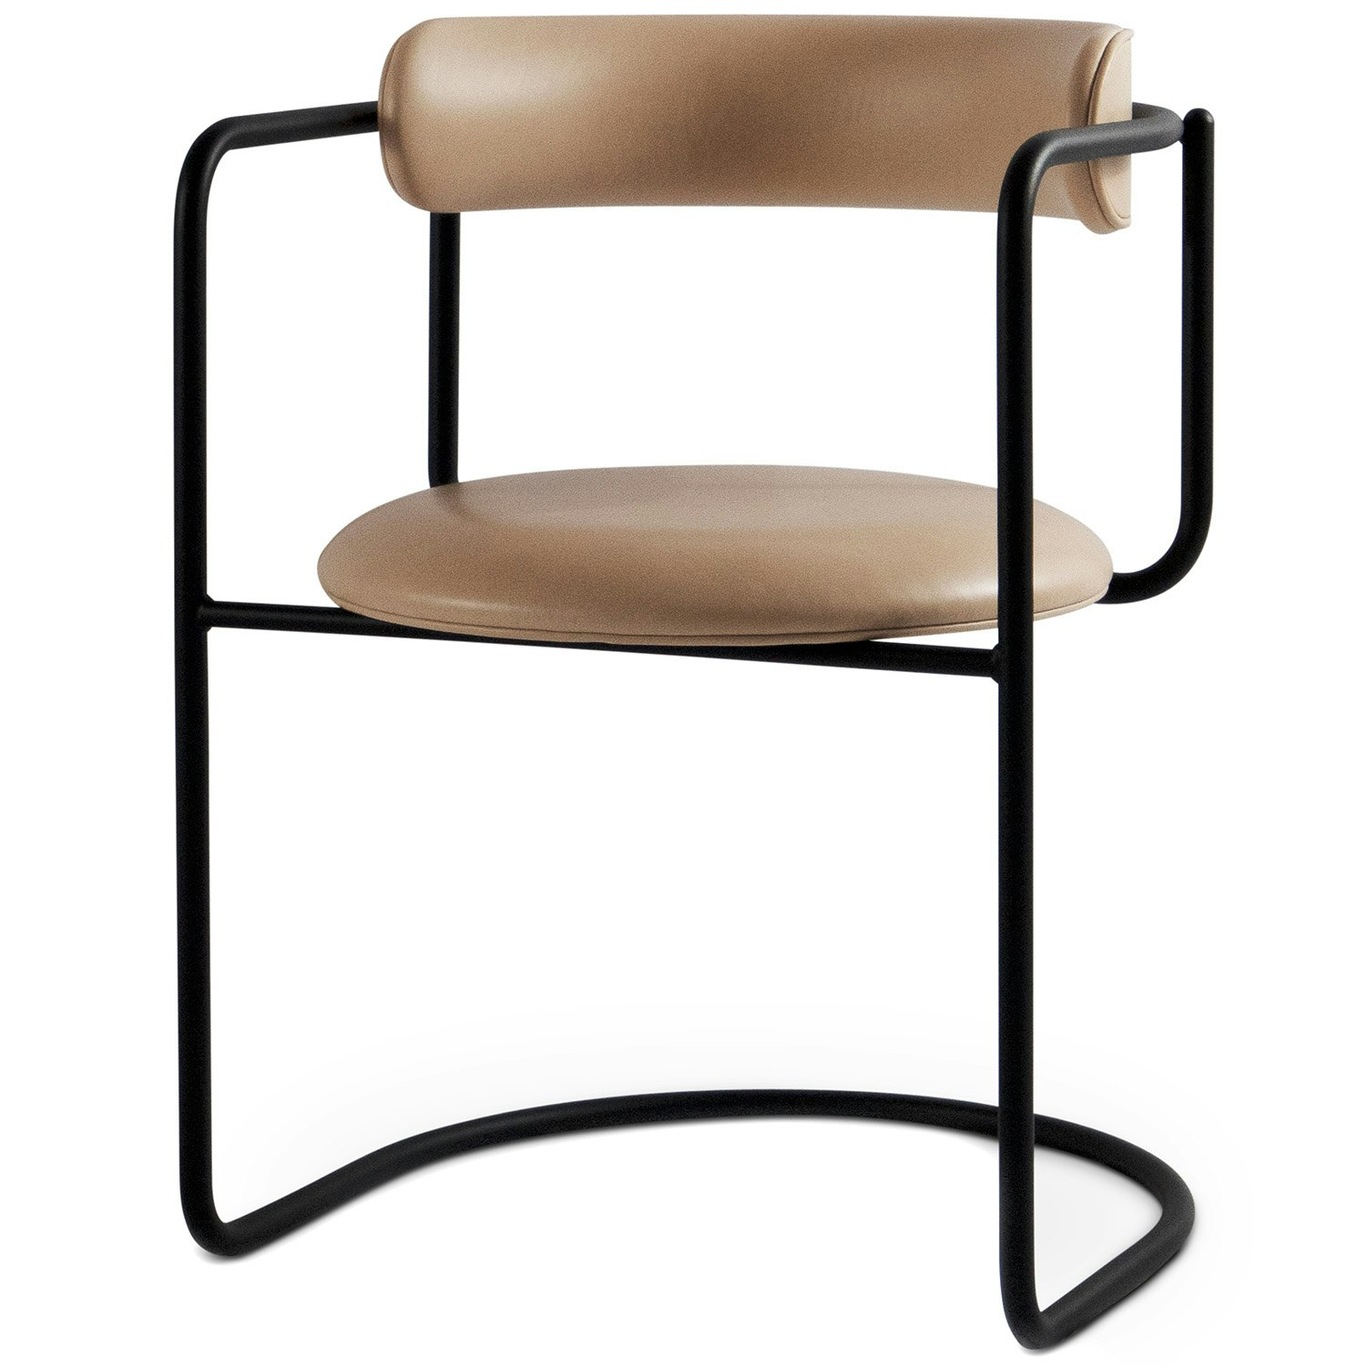 FF Cantilever Chair, Tan Leather / Black